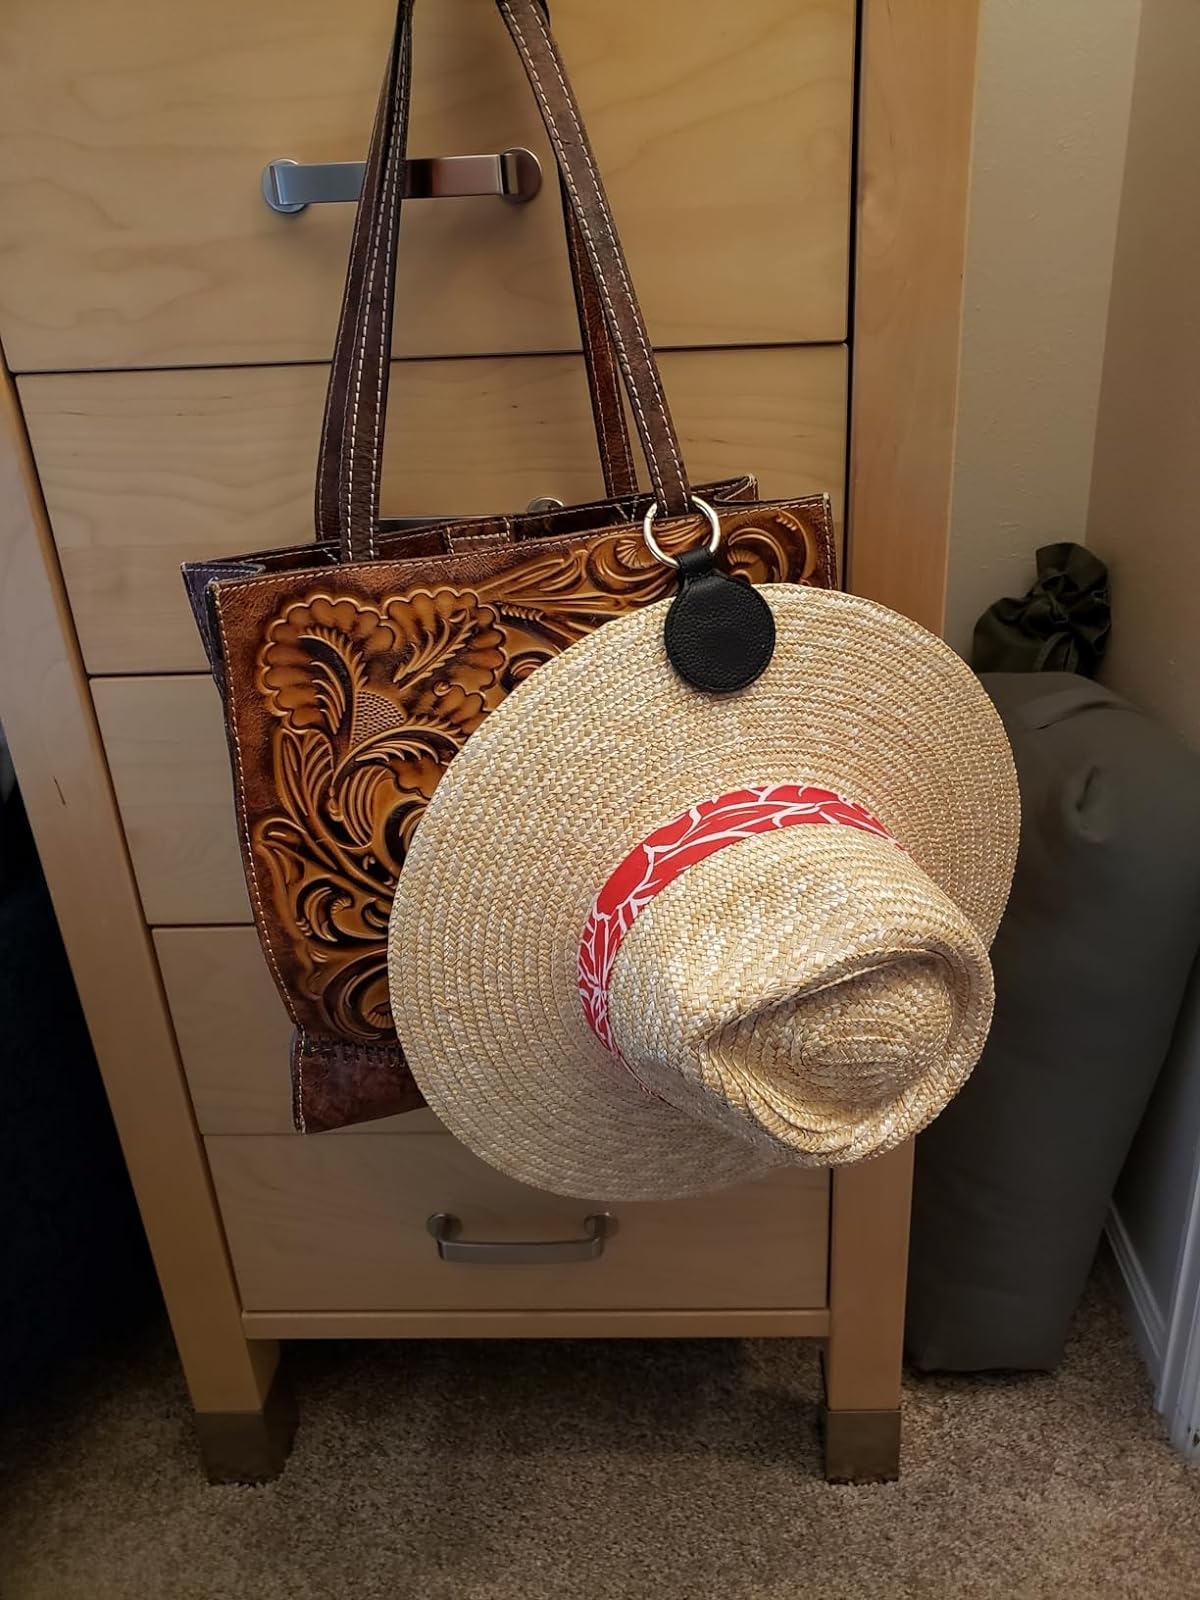 A straw hat with a red band hangs on a cabinet knob beside a tooled leather tote bag